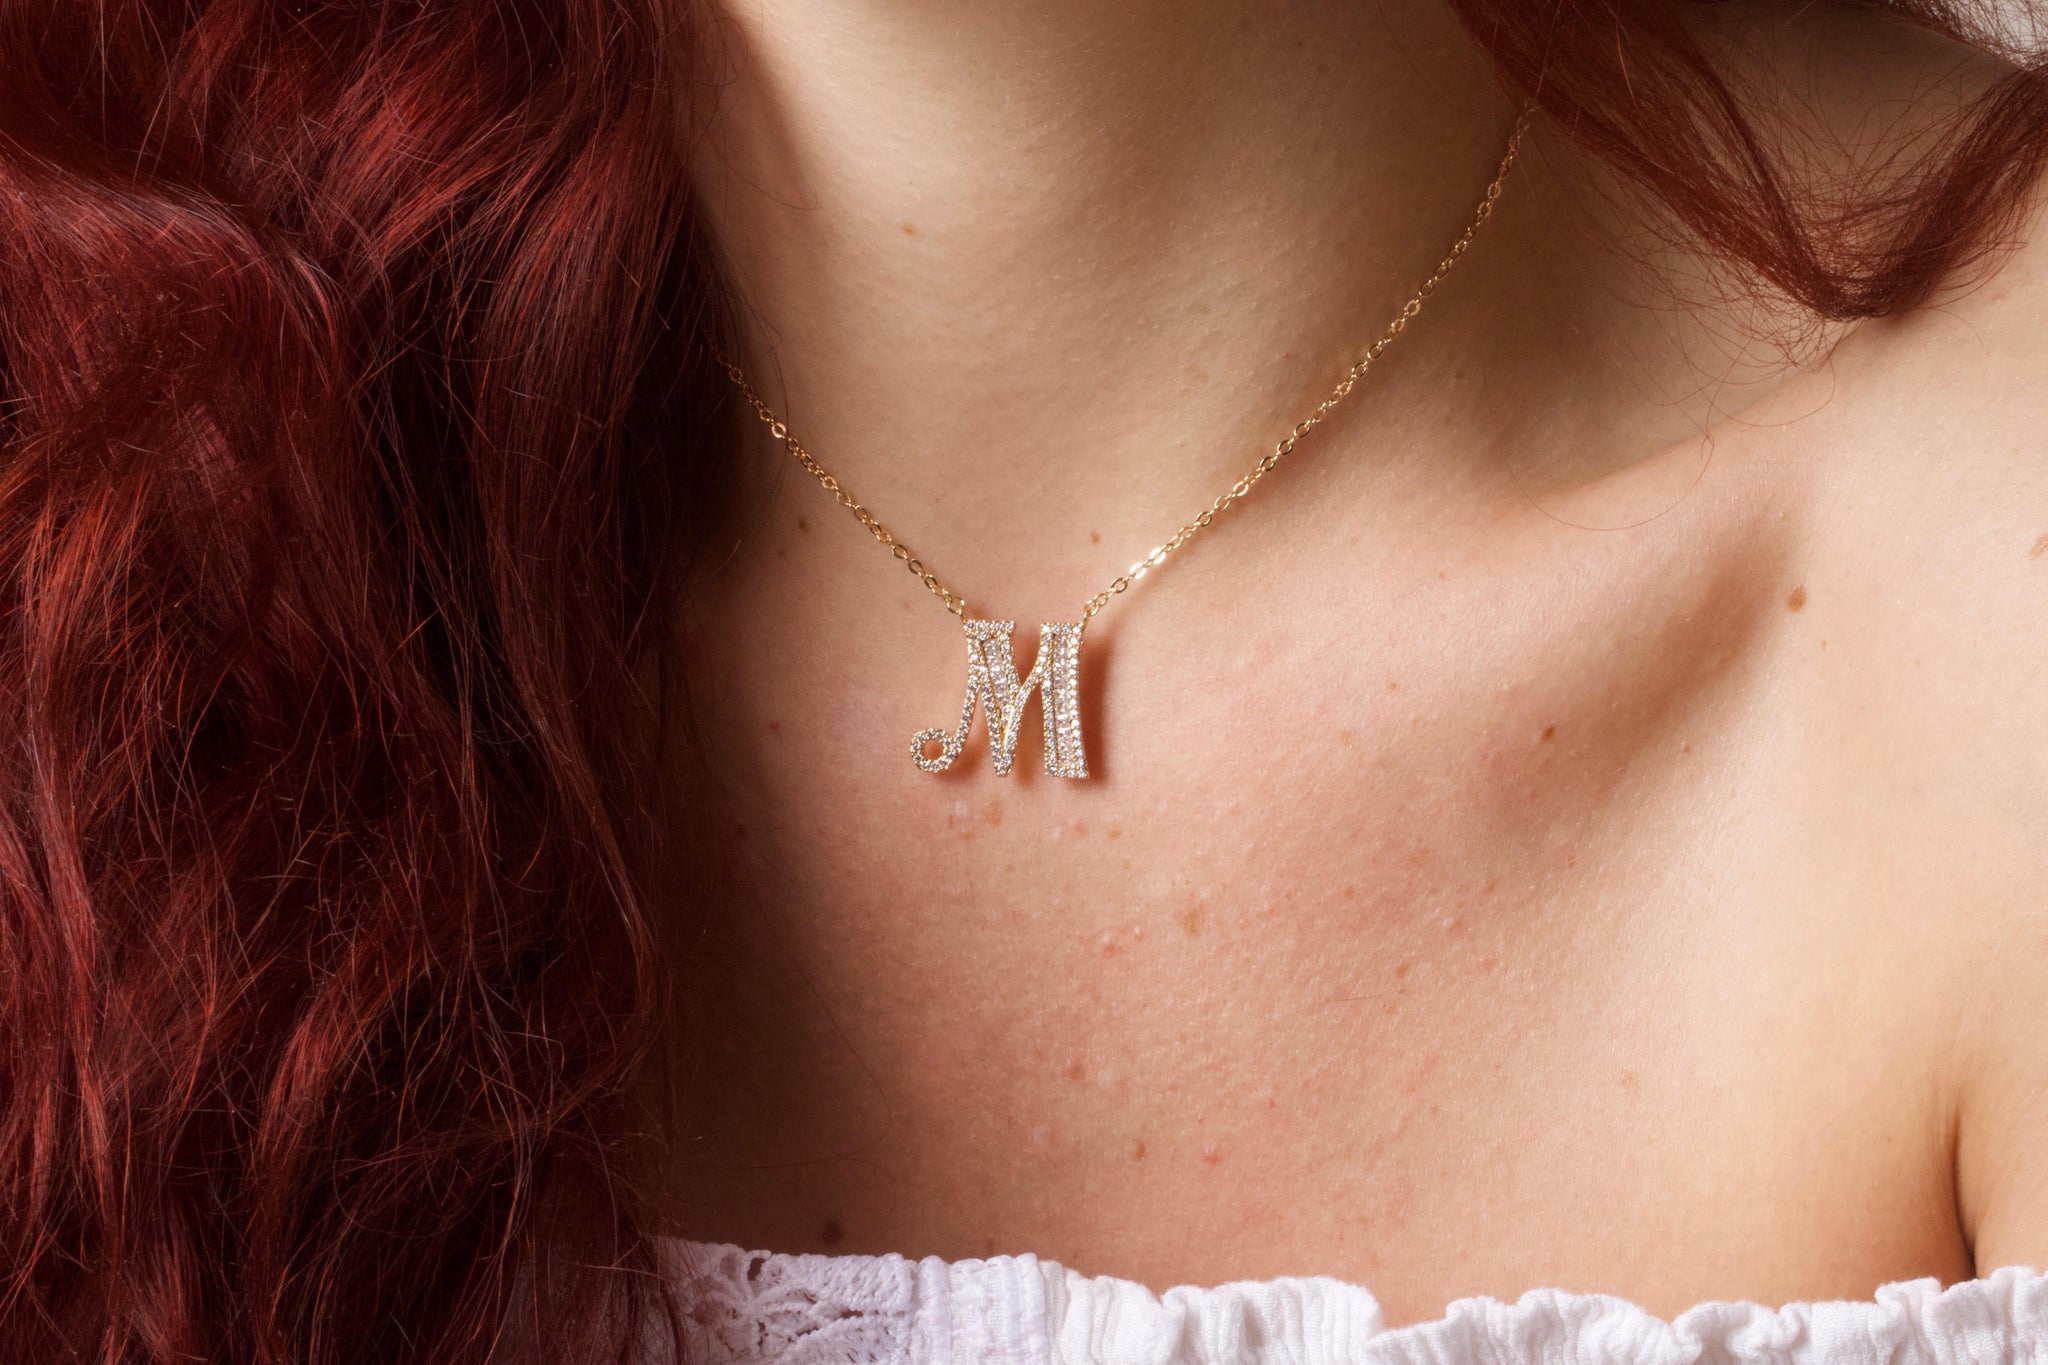 T - Initial Necklace